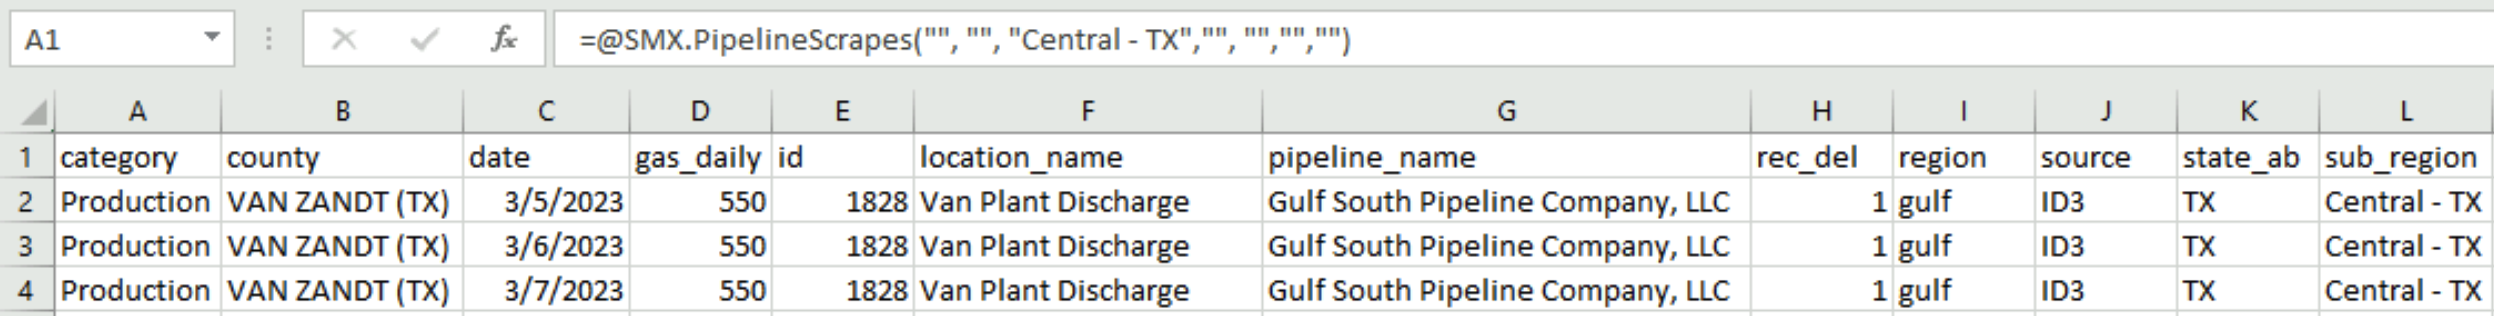 An example of PipelineScrapes